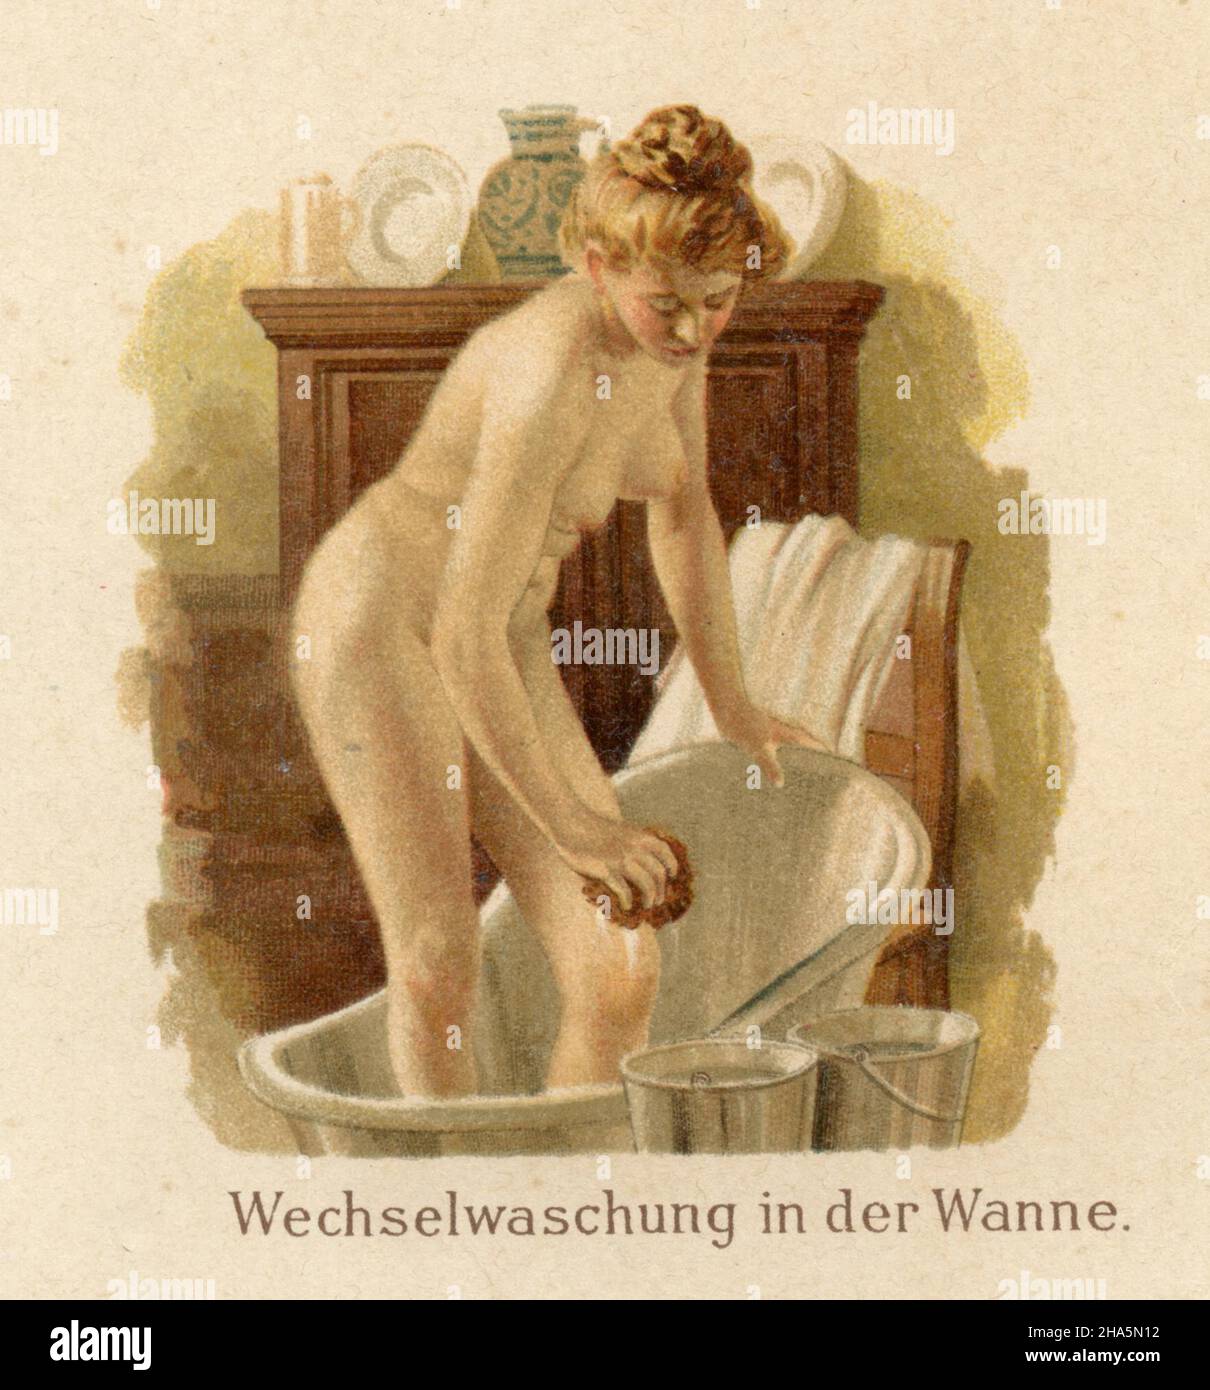 Water applications in nursing: alternate washing in the tub ,  (medicine book, 1905) Stock Photo